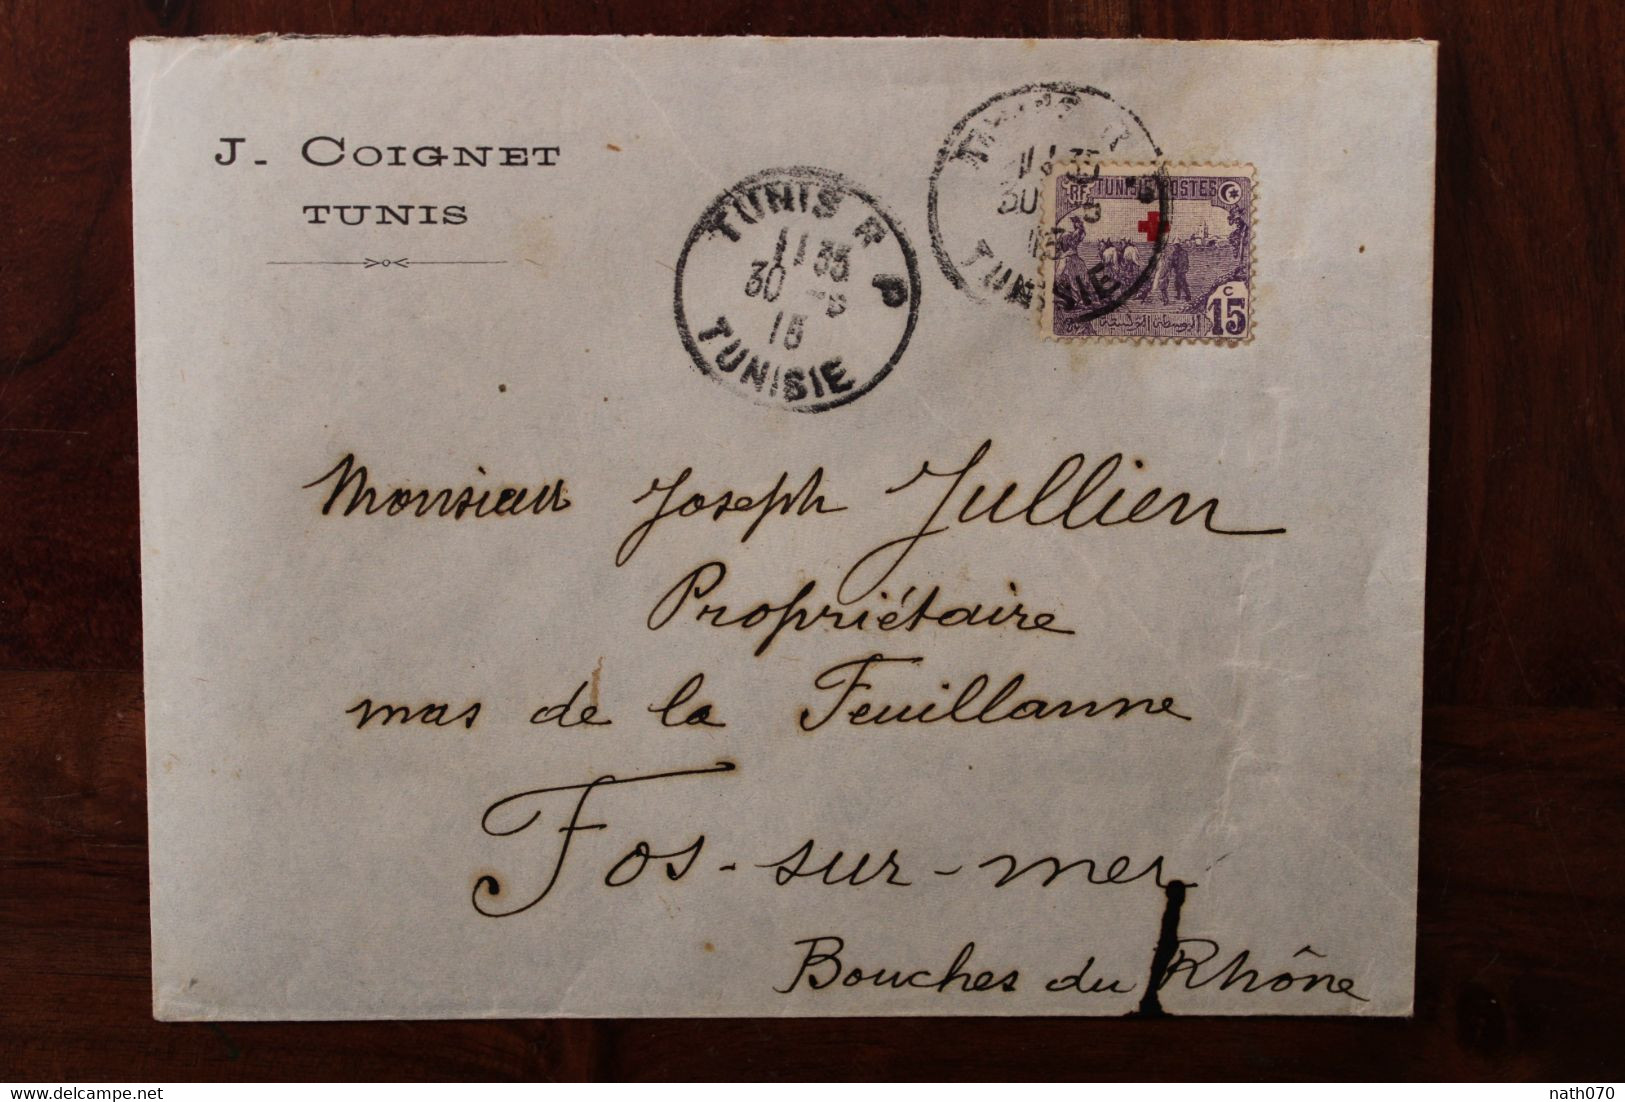 Tunisie 1915 Fos Sur Mer Surcharge Croix Rouge France Cover Colonie Ww1 Wk1 Timbre Seul - Covers & Documents